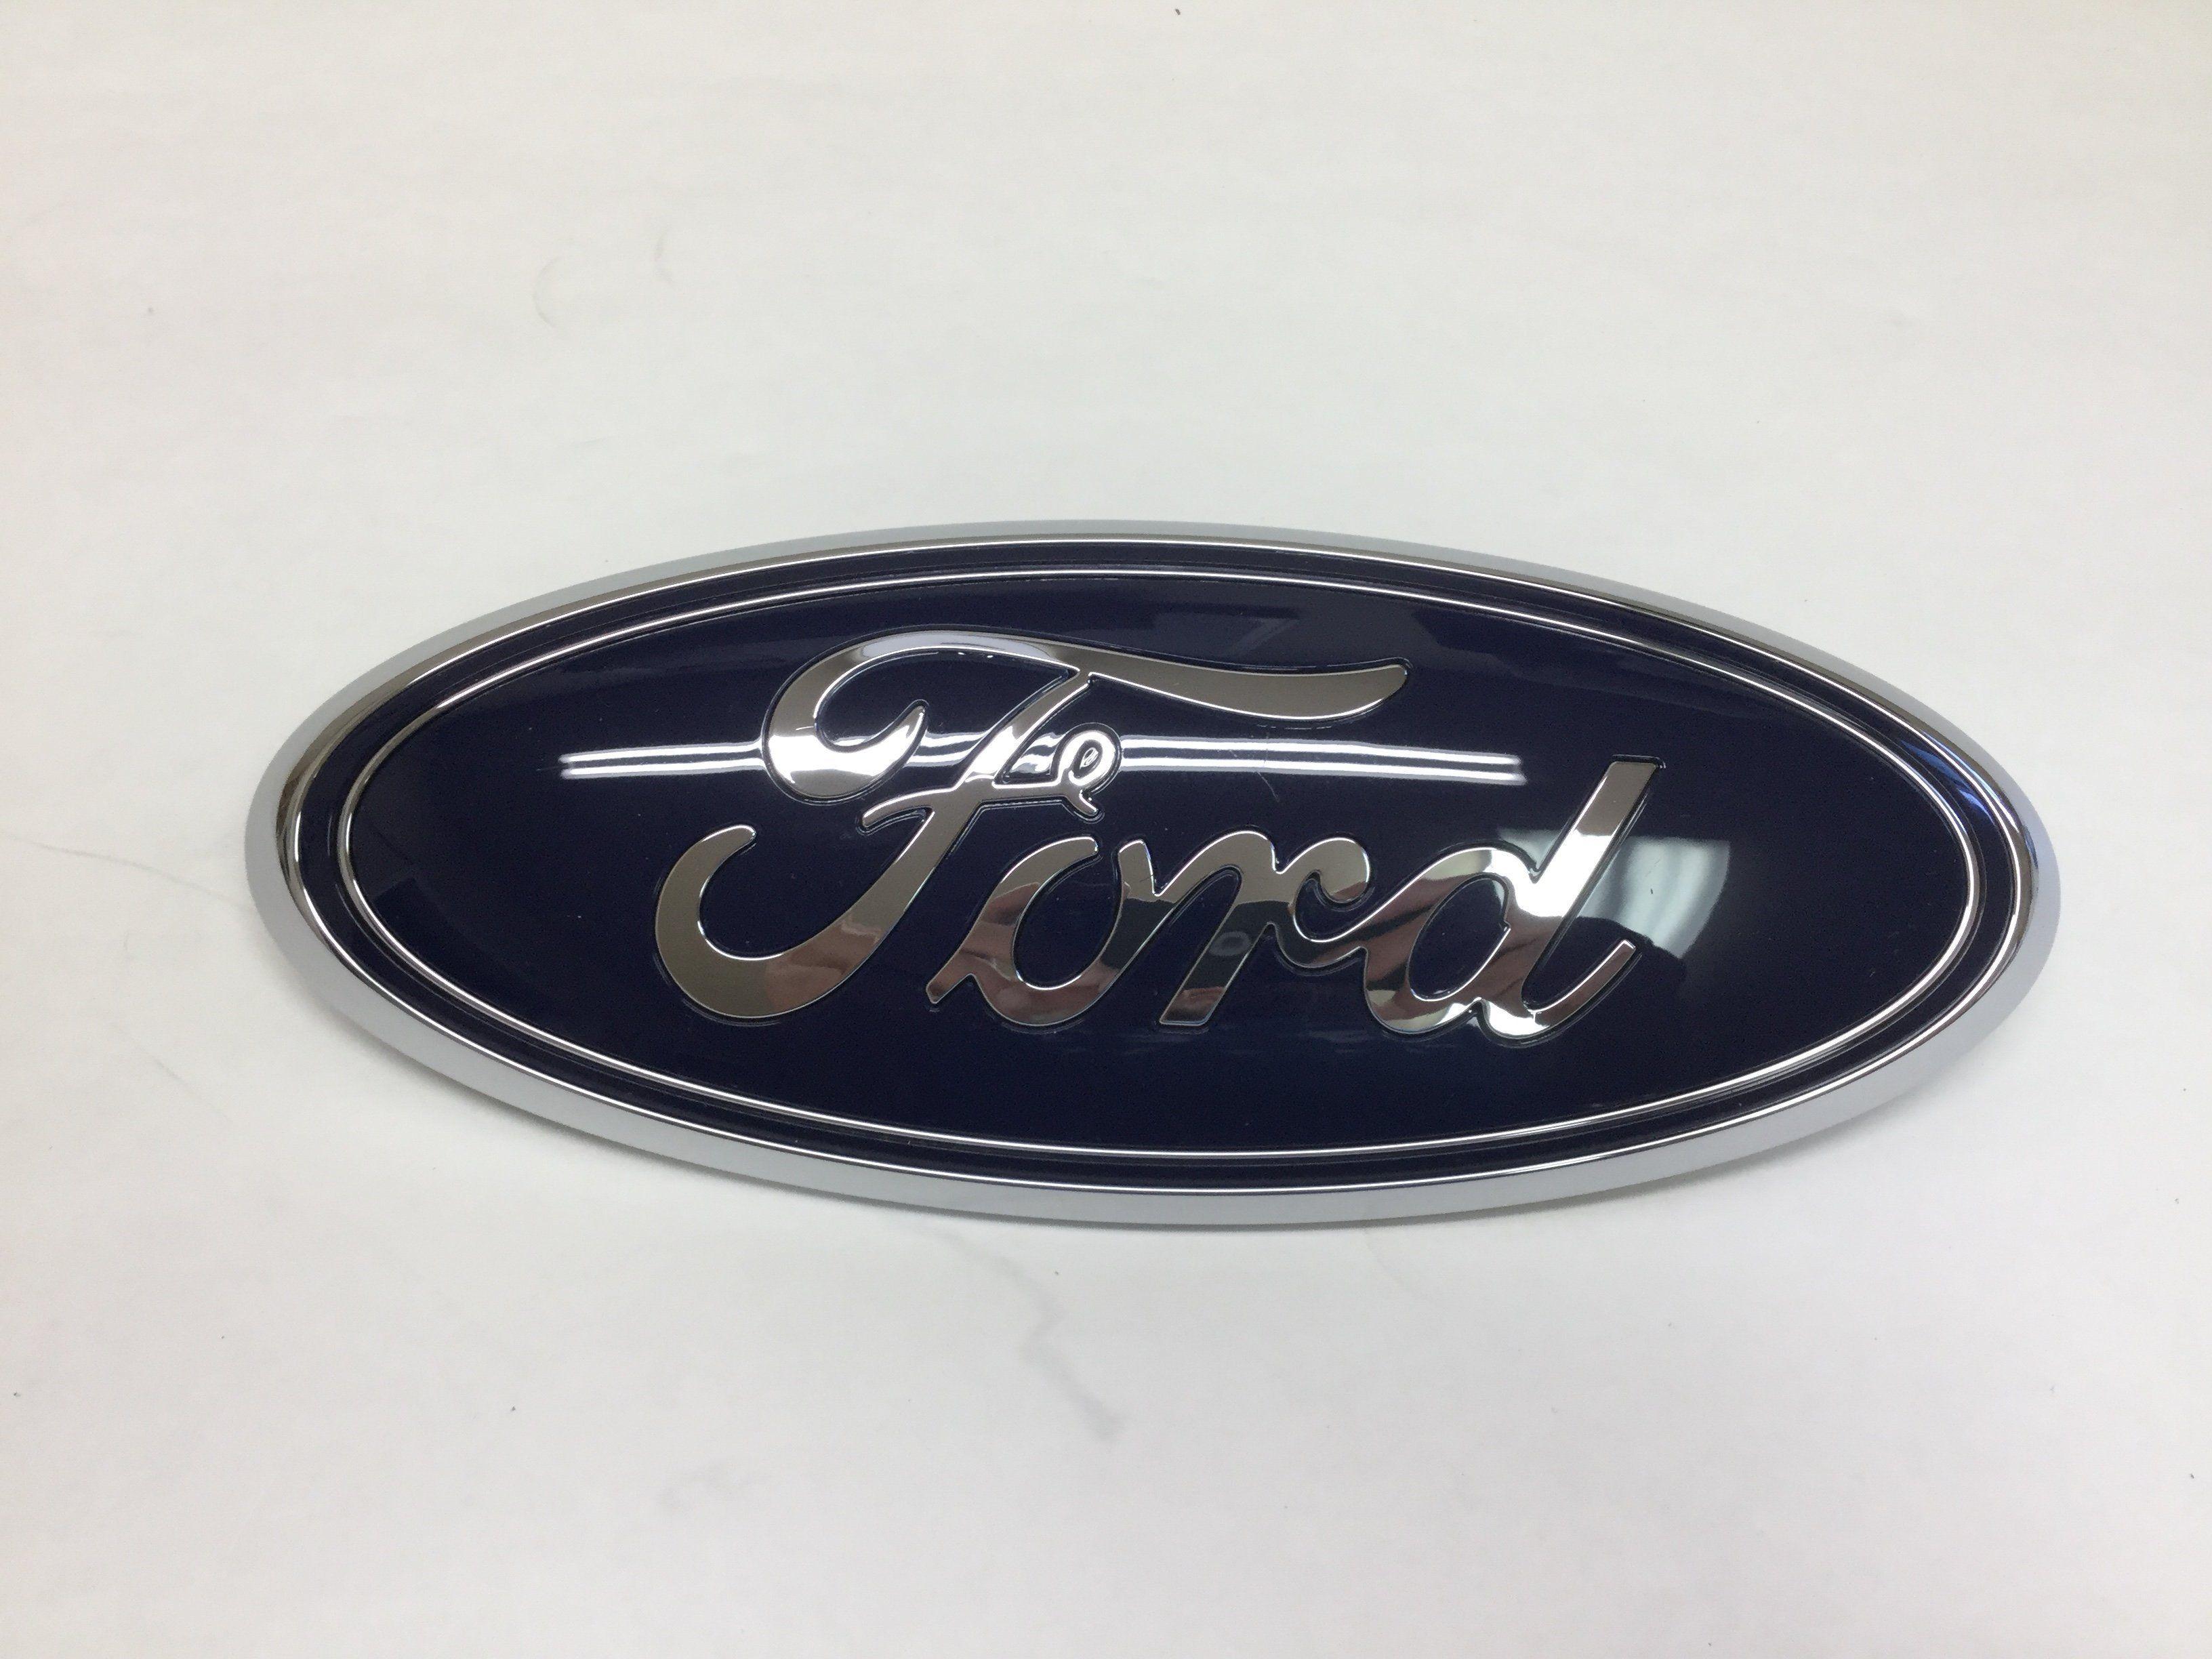 New Ford Motor Logo - New Ford Edge Flex Taurus X Front Grille Chrome or Blue Oval Ford